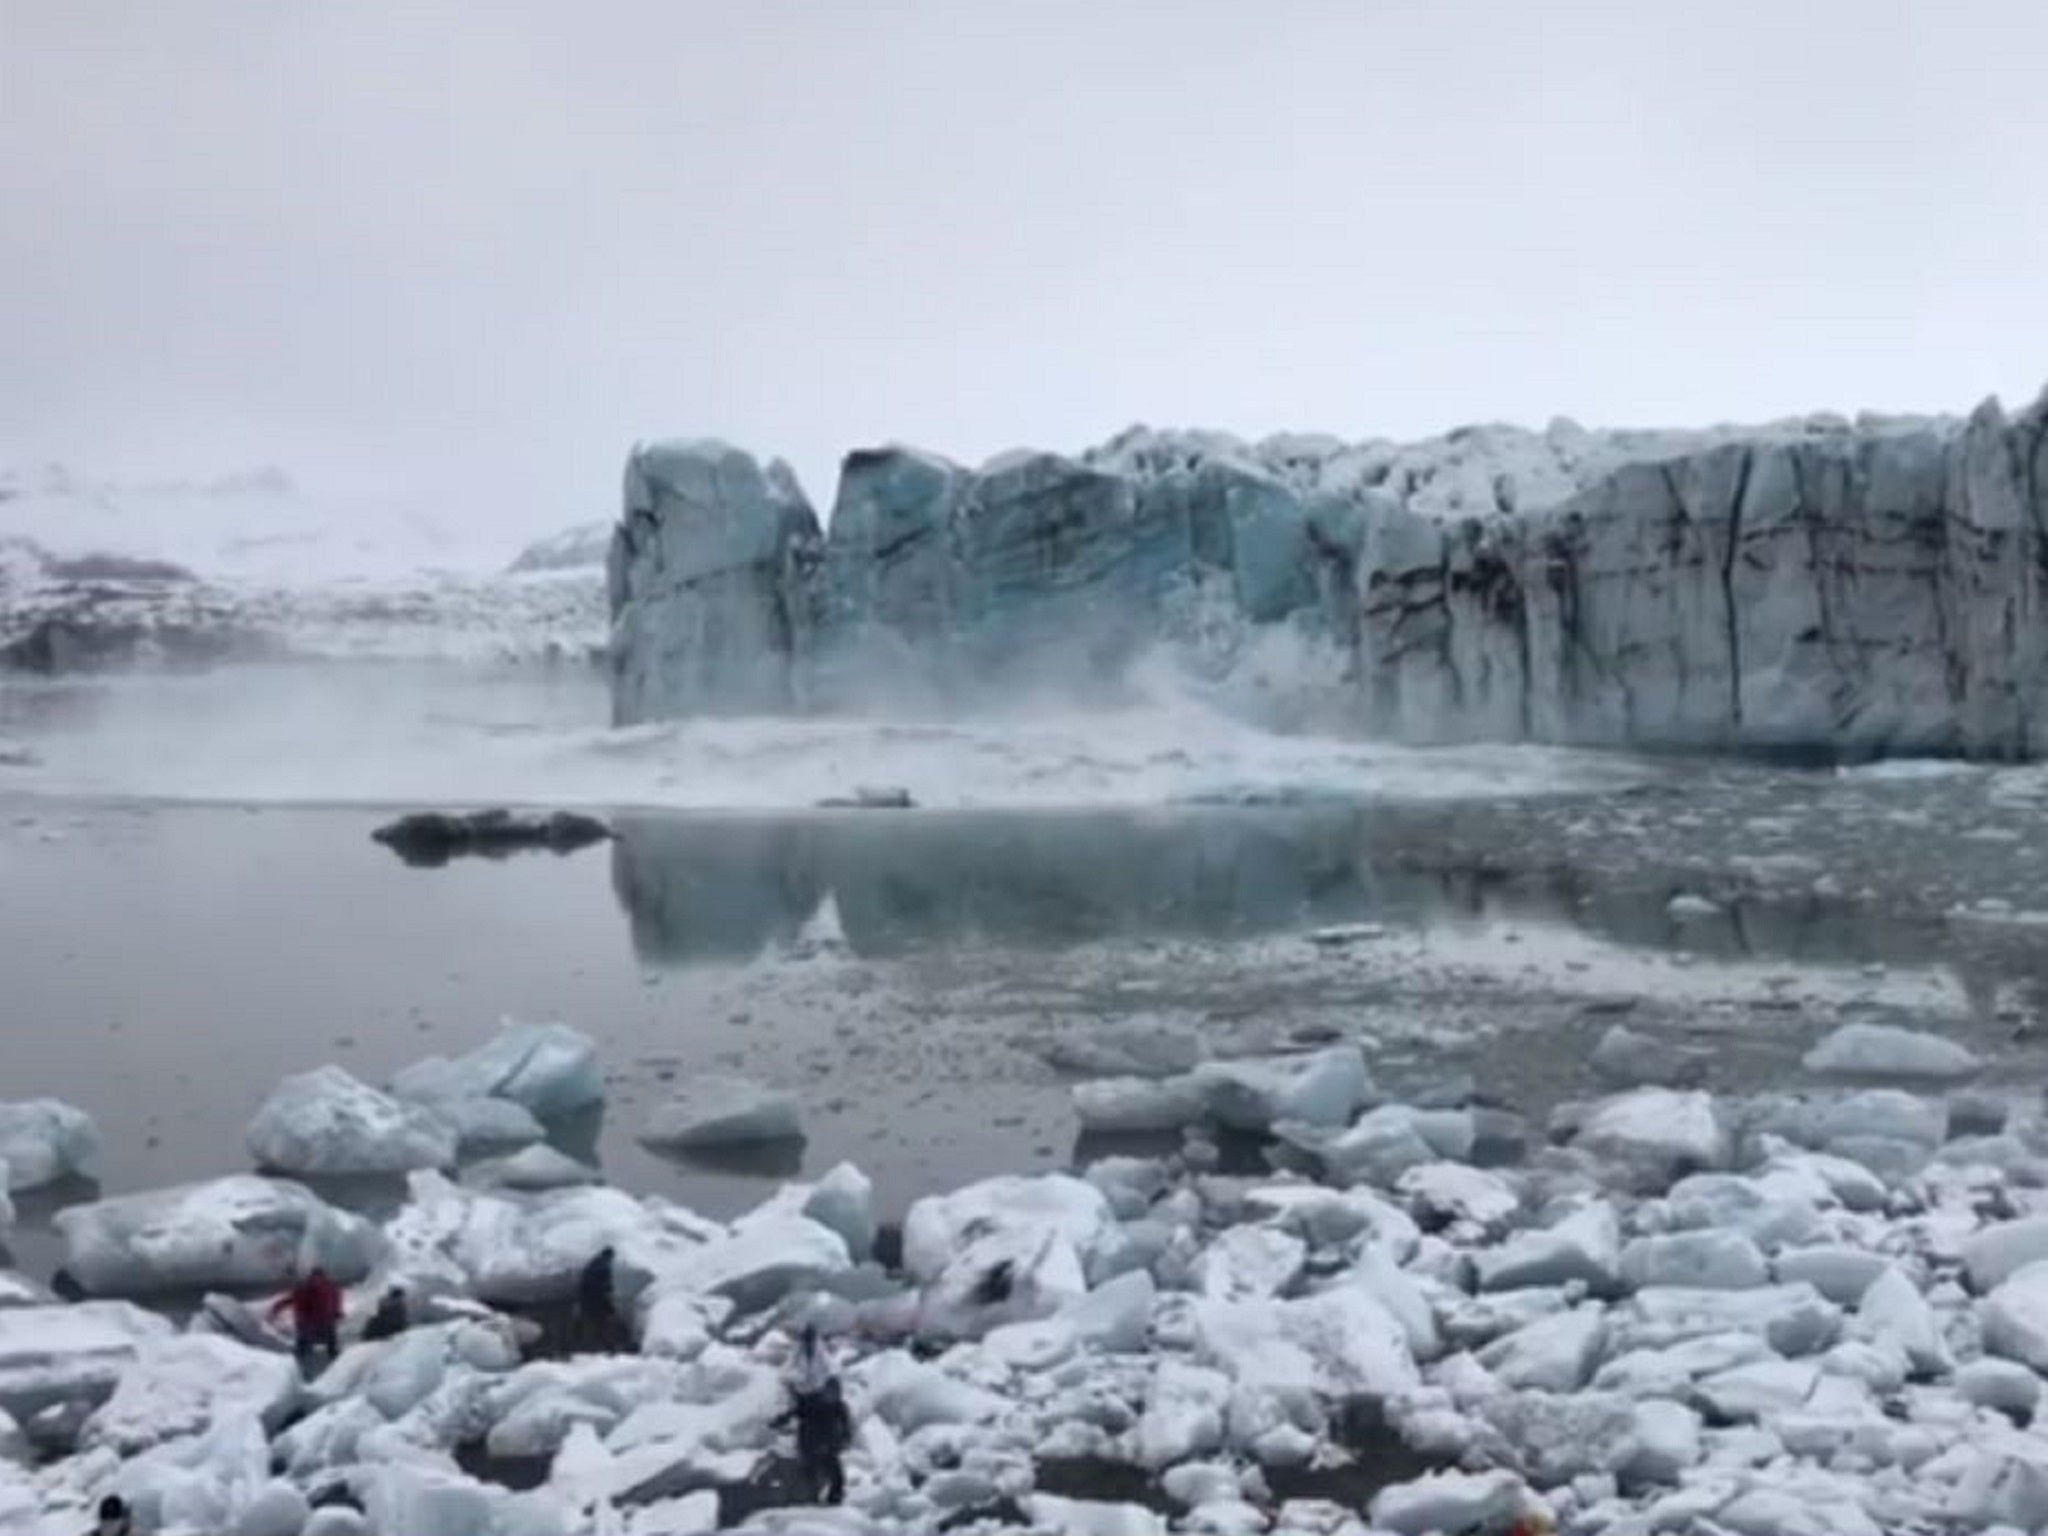 Part of Breiðamerkurjökull glacier broke off and fell into the sea, causing a huge wave to crash towards a group of tourists in Vatnajökull National Park, southeastern Iceland.